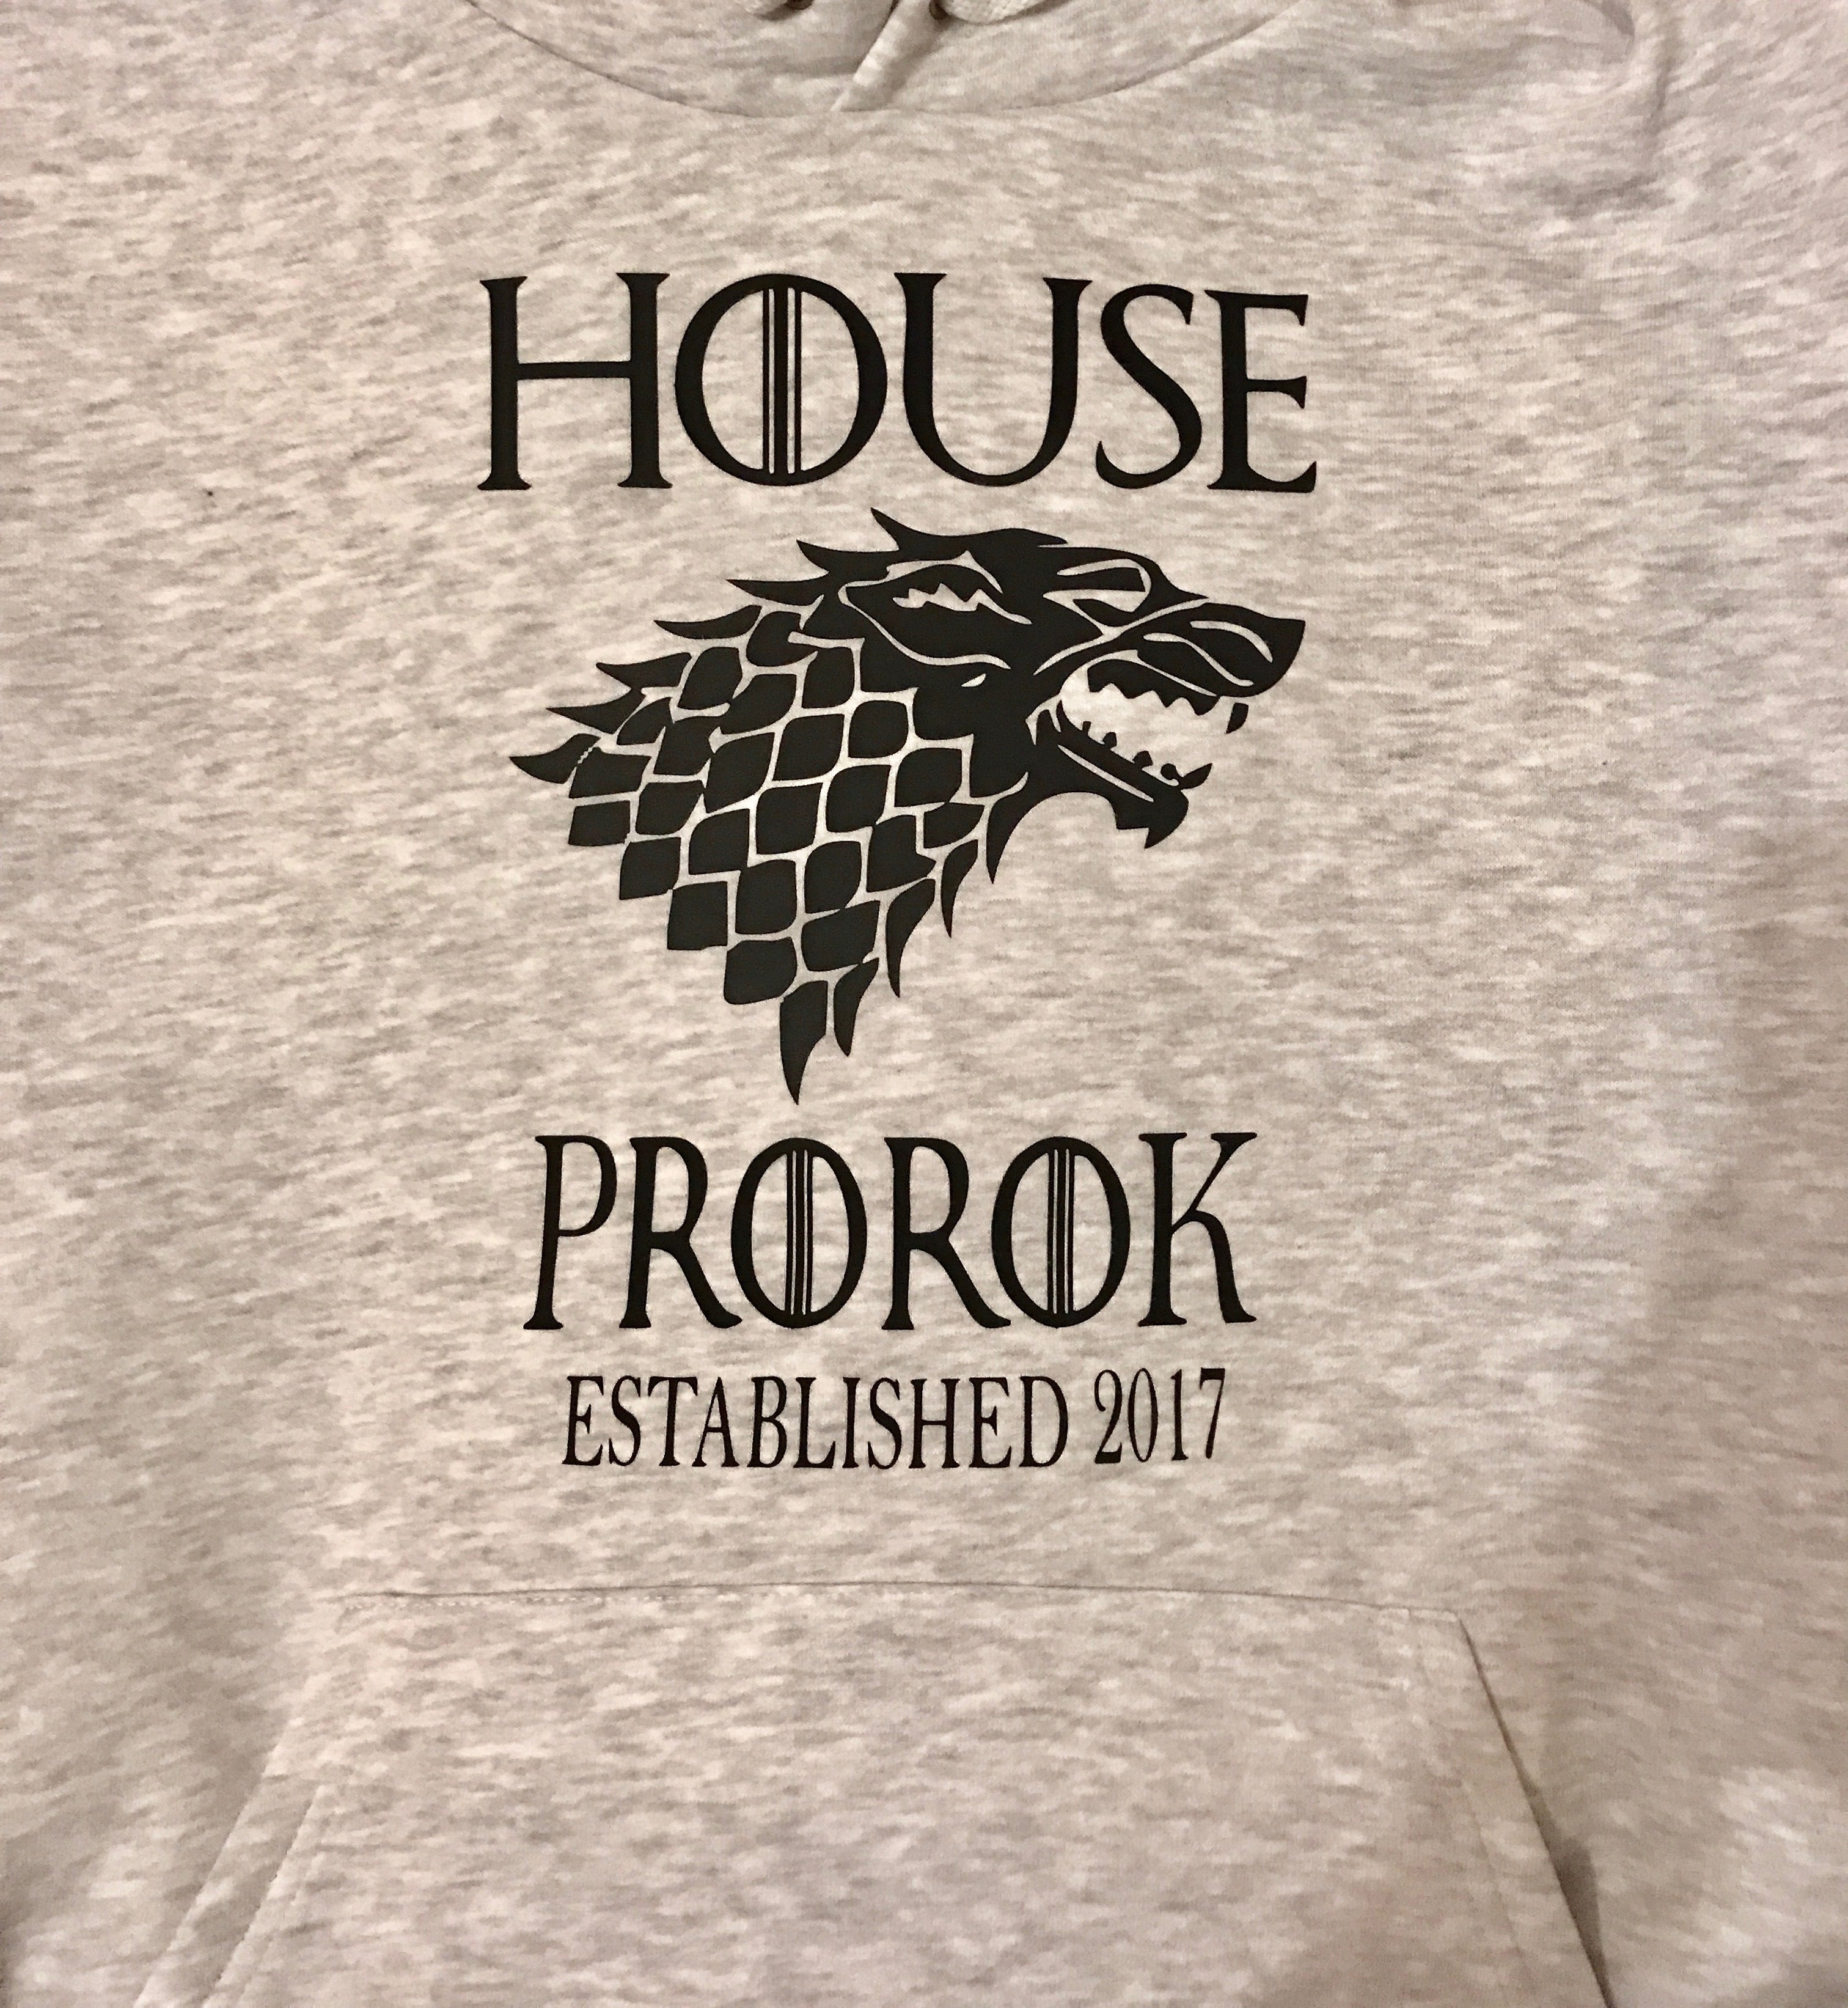 Game of Thrones T shirt / Hoodie House - your surname personalized T shirt / Hoodie